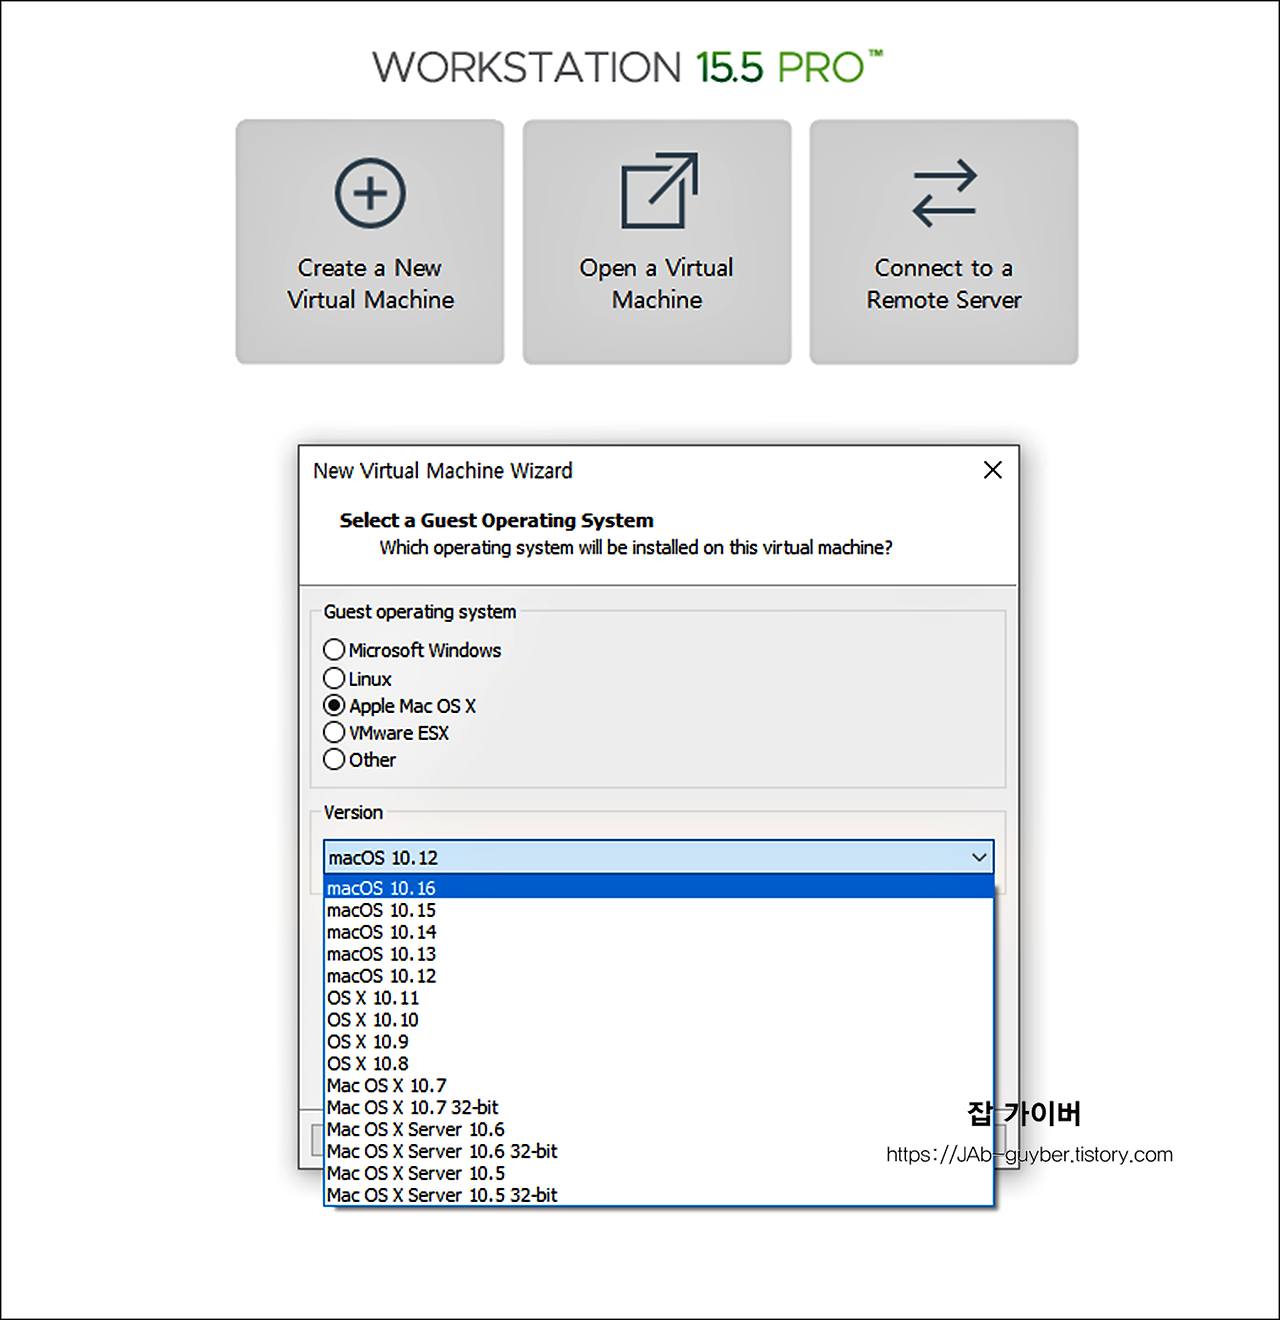 how to exit vmware workstation on mac